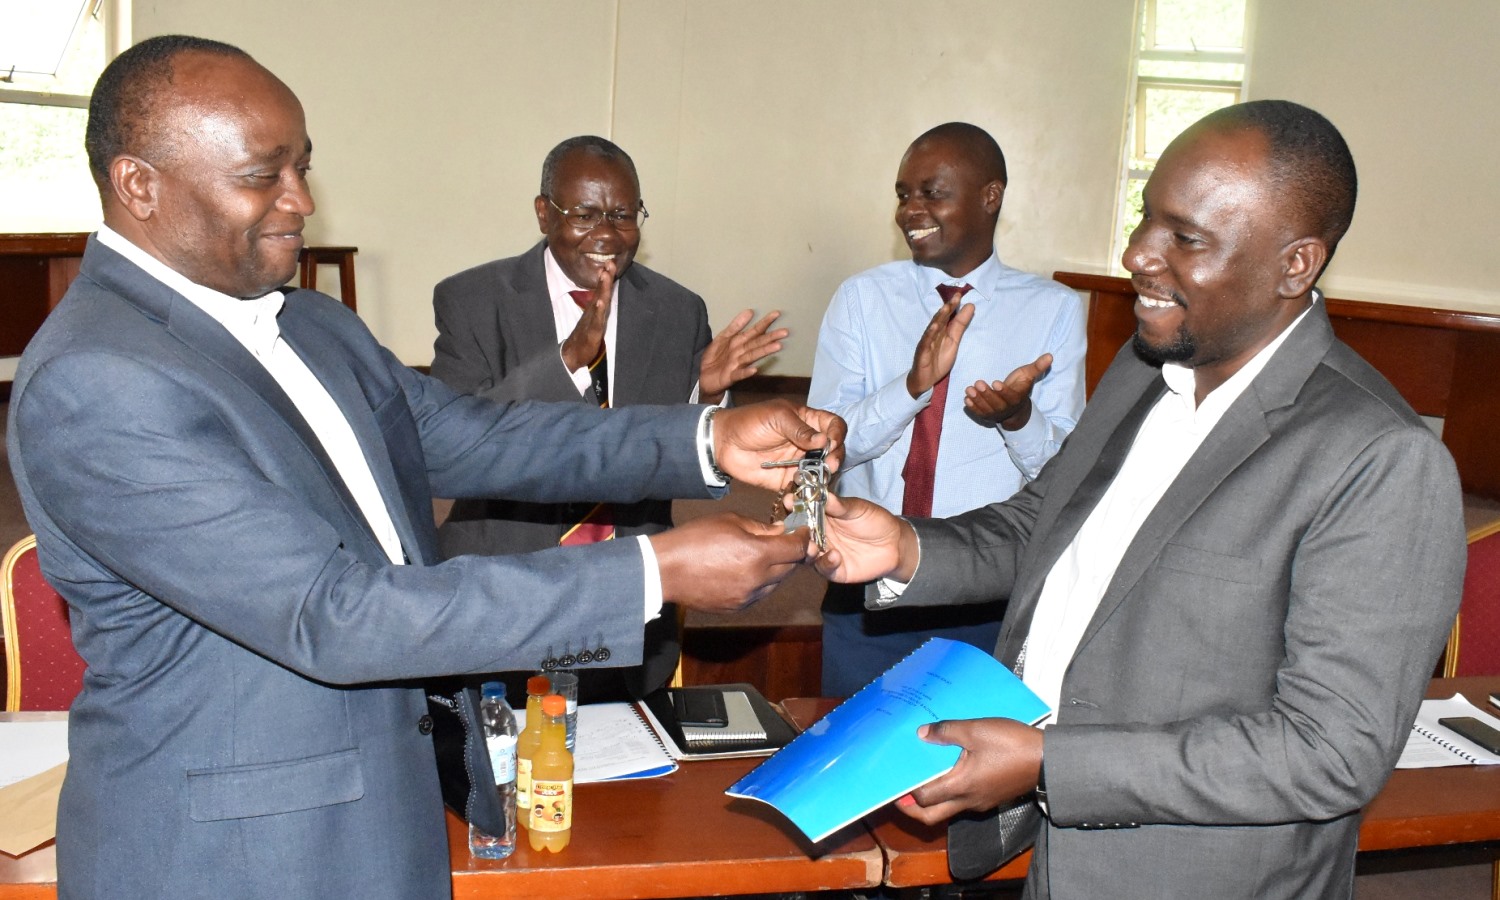 Outgoing Head FTHN, Prof. Archileo Kaaya (Left) hands over keys to the office to New Head, Dr. Ivan Muzira Mukisa (Right) as the Principal CAES-Prof. Bernard Bashaasha (2nd Left) and Dean SFTNB-Dr. Abel Atukwase (2nd Right) applaud on 19th August 2019, Conference Hall, SFTNB, CAES, Makerere University, Kampala Uganda.